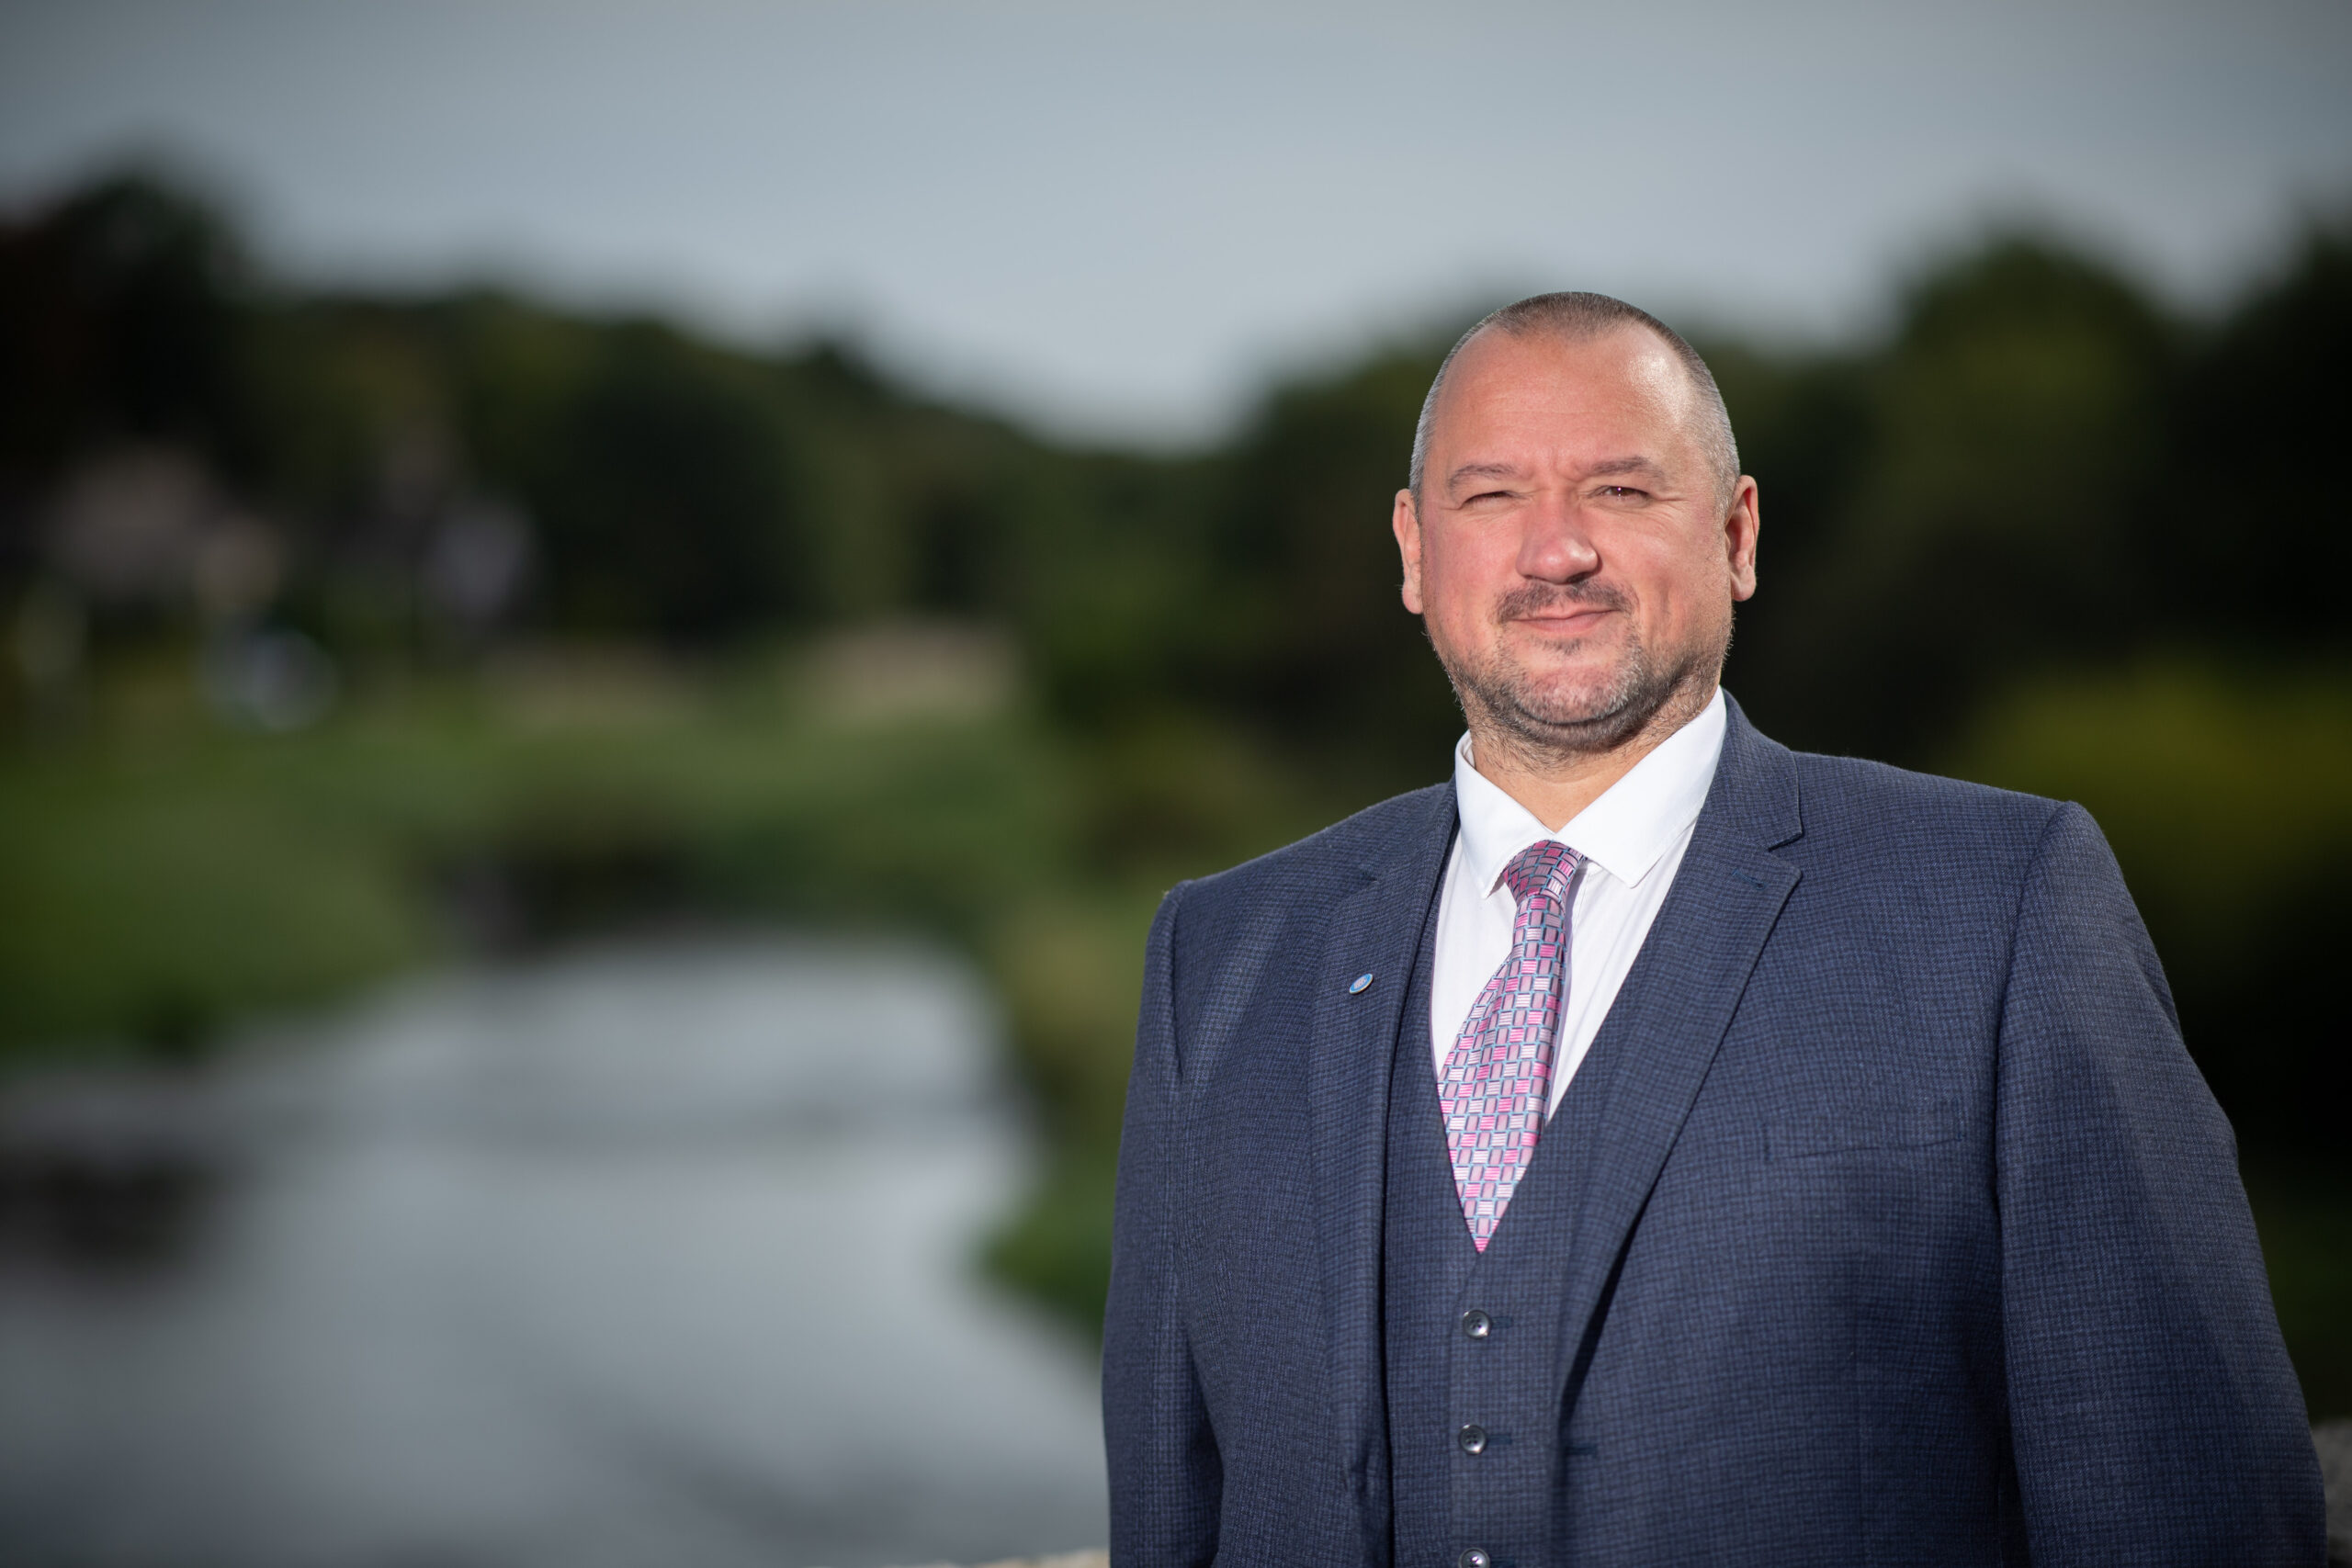 Phil Anderson of Phil Anderson Financial Services, Ellon, Aberdeenshire